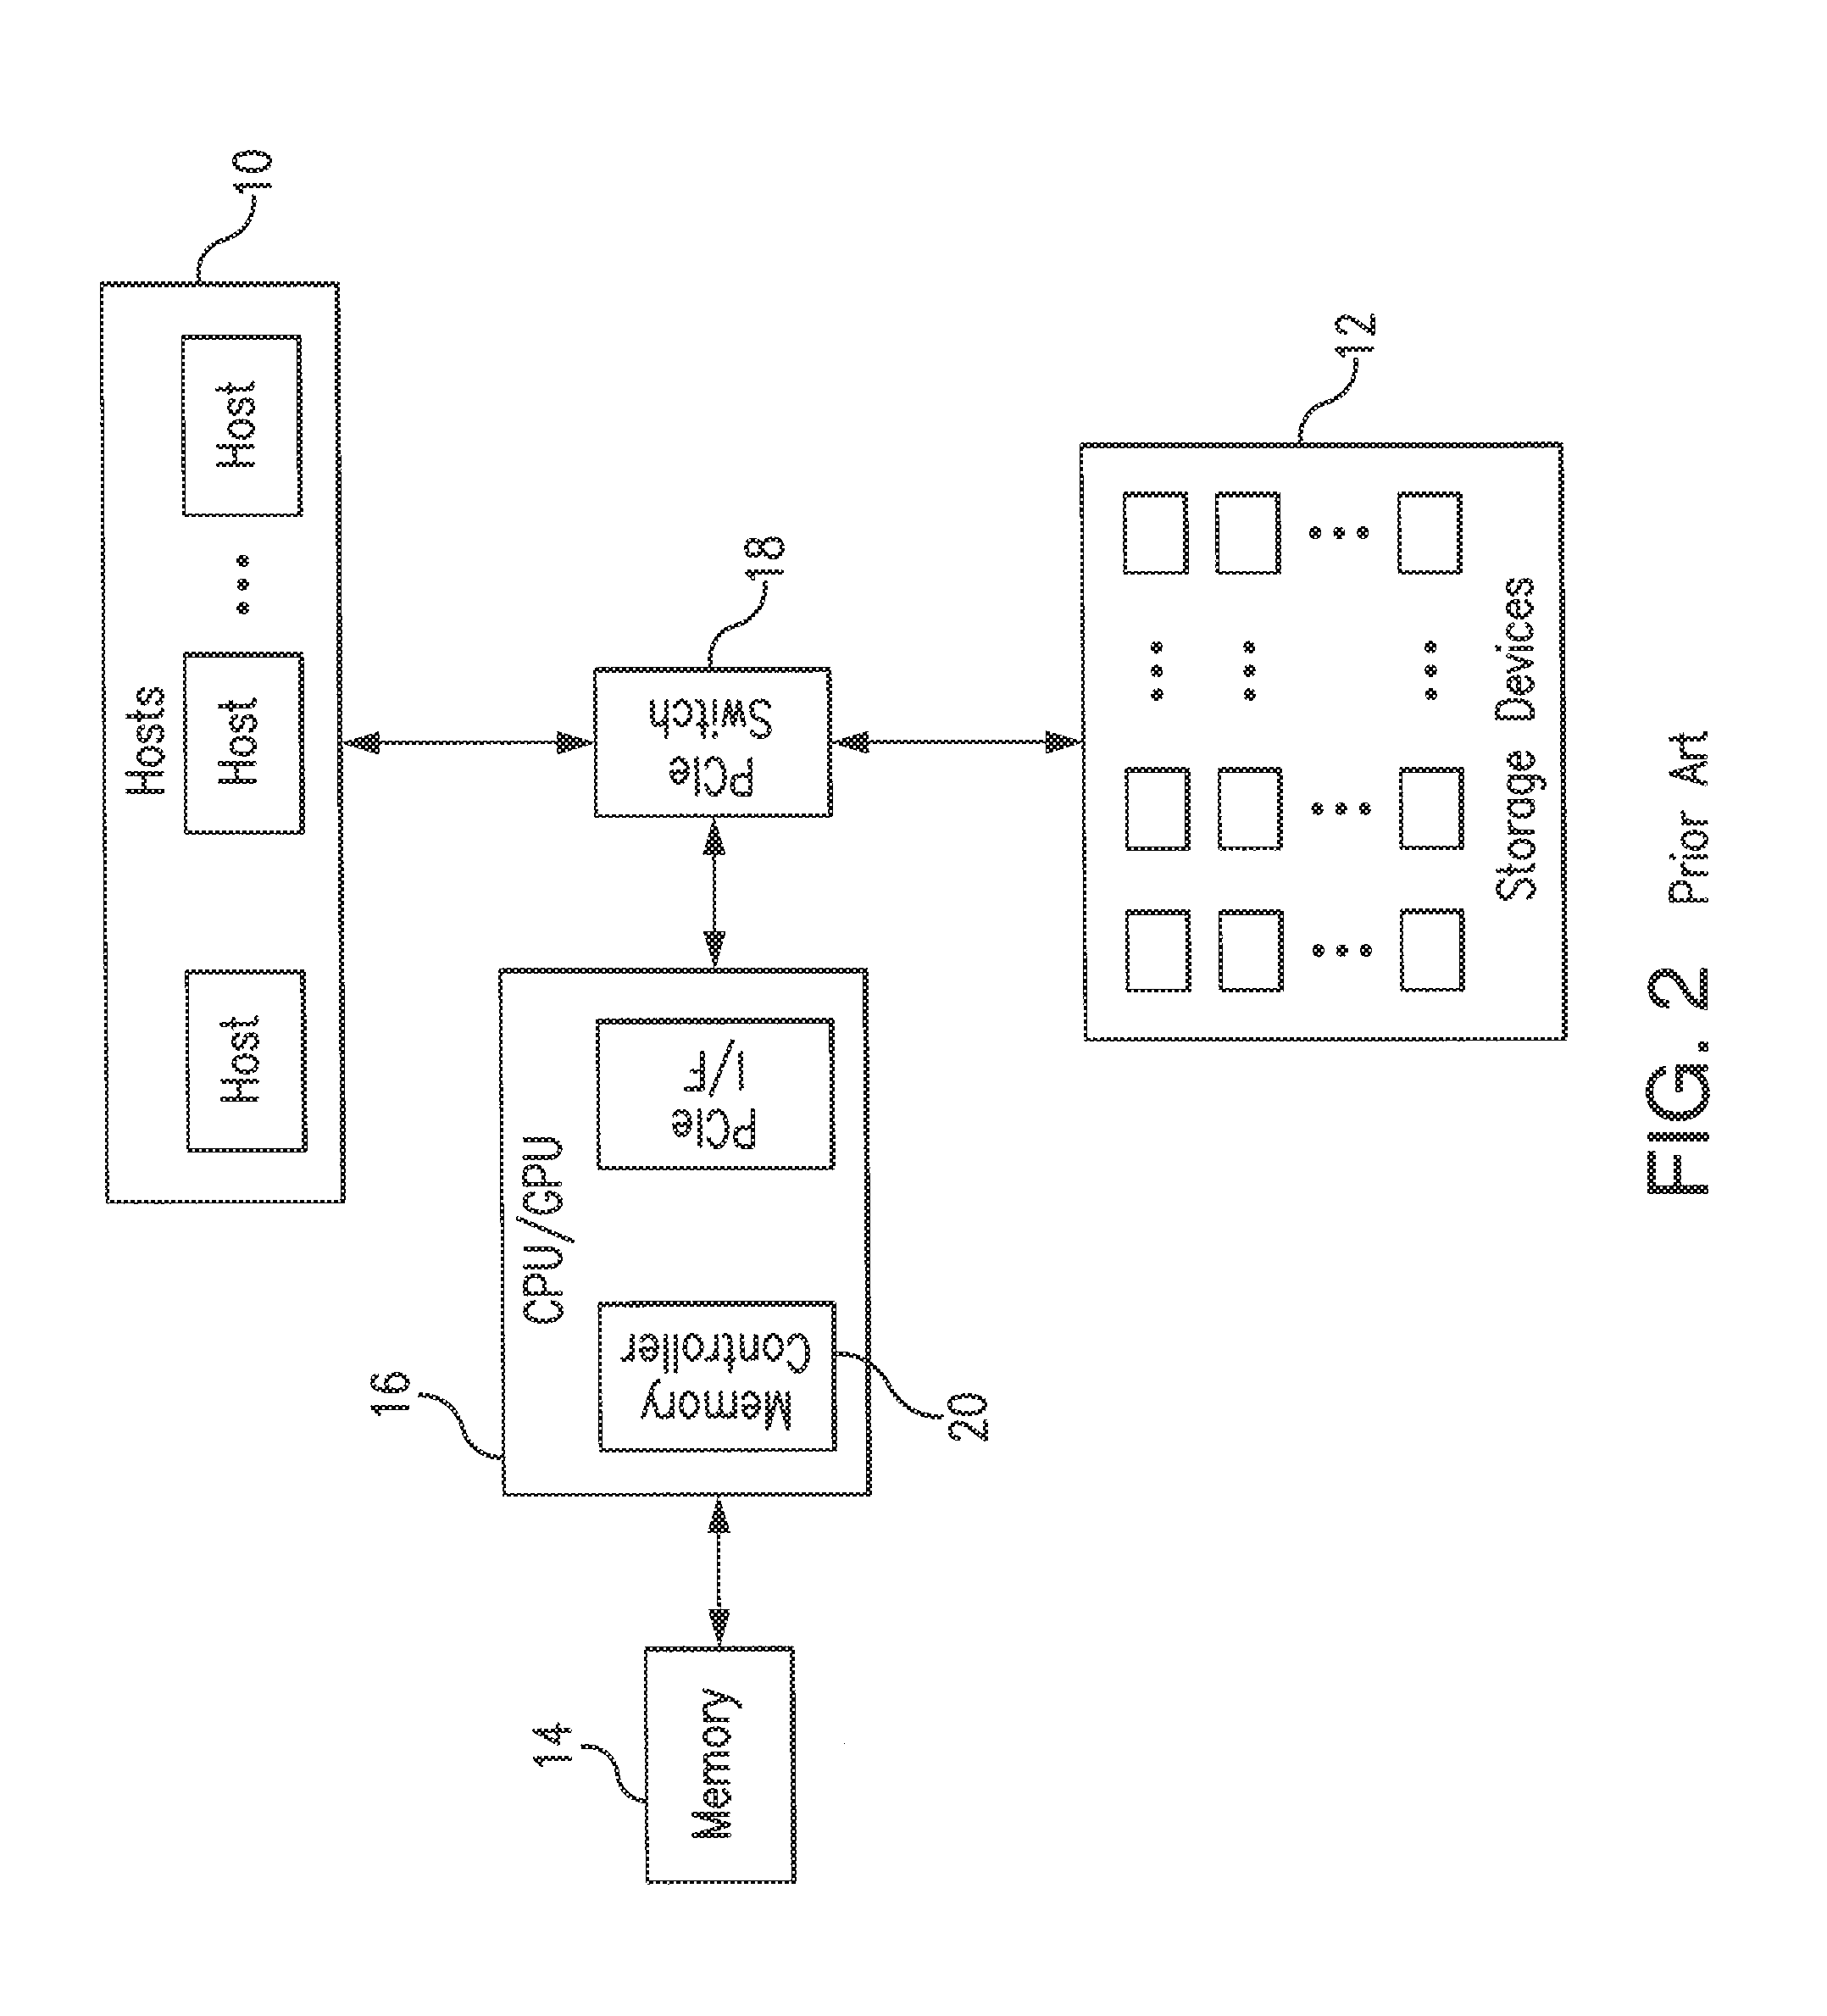 Data storage system and method for data migration between high-performance computing architectures and data storage devices using memory controller with embedded XOR capability